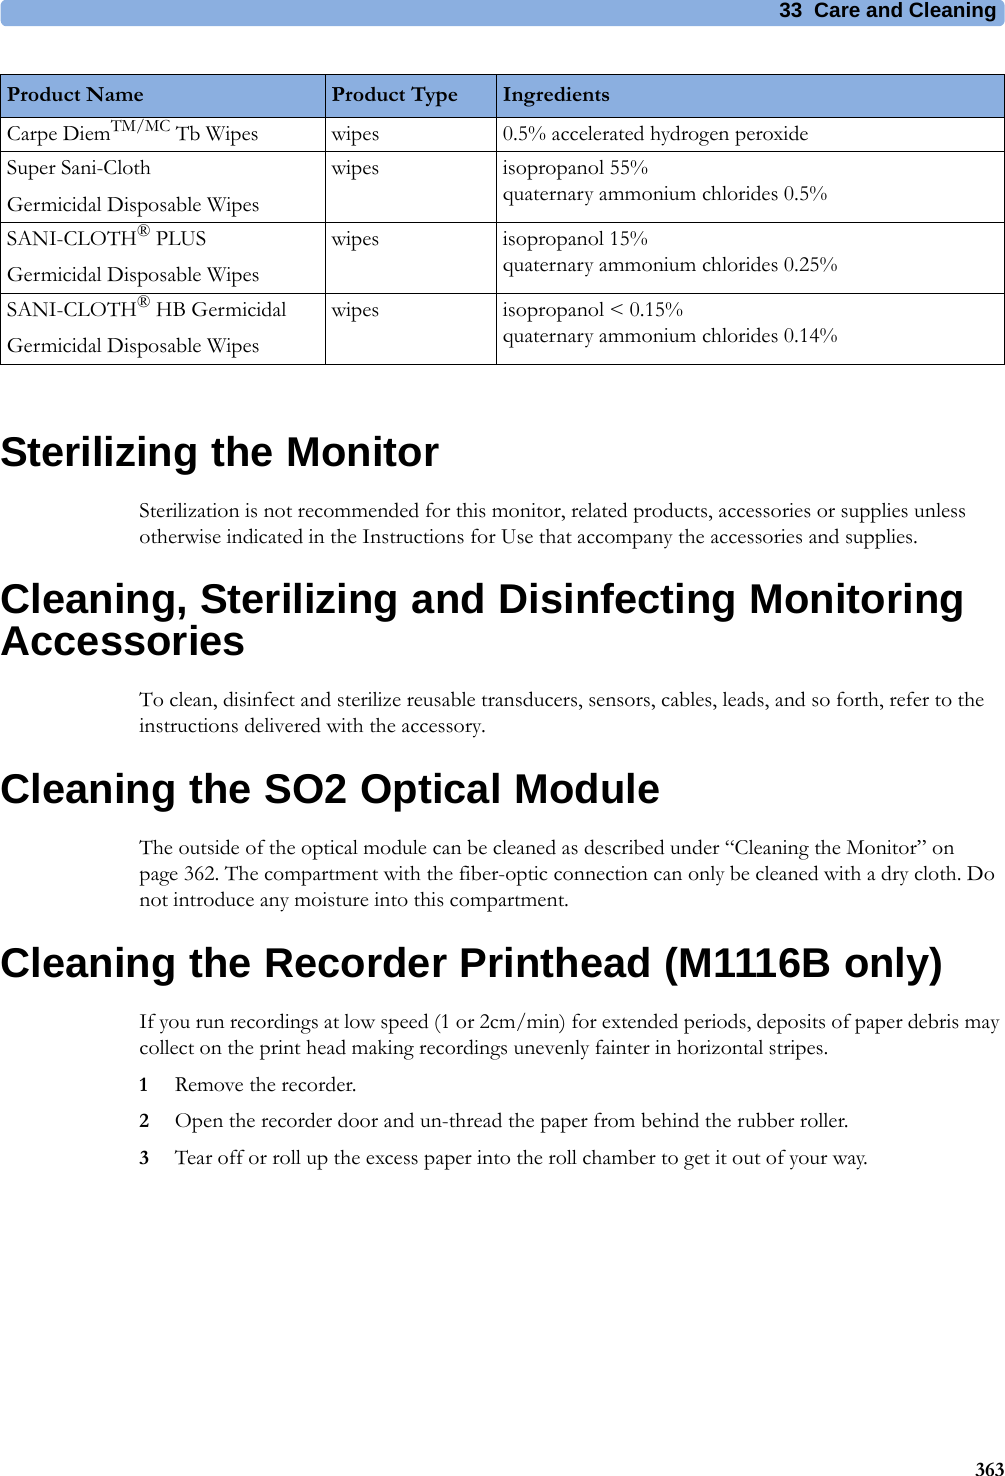 33 Care and Cleaning363Sterilizing the MonitorSterilization is not recommended for this monitor, related products, accessories or supplies unless otherwise indicated in the Instructions for Use that accompany the accessories and supplies.Cleaning, Sterilizing and Disinfecting Monitoring AccessoriesTo clean, disinfect and sterilize reusable transducers, sensors, cables, leads, and so forth, refer to the instructions delivered with the accessory.Cleaning the SO2 Optical ModuleThe outside of the optical module can be cleaned as described under “Cleaning the Monitor” on page 362. The compartment with the fiber-optic connection can only be cleaned with a dry cloth. Do not introduce any moisture into this compartment.Cleaning the Recorder Printhead (M1116B only)If you run recordings at low speed (1 or 2cm/min) for extended periods, deposits of paper debris may collect on the print head making recordings unevenly fainter in horizontal stripes.1Remove the recorder.2Open the recorder door and un-thread the paper from behind the rubber roller.3Tear off or roll up the excess paper into the roll chamber to get it out of your way.Carpe DiemTM/MC Tb Wipes wipes 0.5% accelerated hydrogen peroxideSuper Sani-ClothGermicidal Disposable Wipeswipes isopropanol 55%quaternary ammonium chlorides 0.5%SANI-CLOTH® PLUSGermicidal Disposable Wipeswipes isopropanol 15%quaternary ammonium chlorides 0.25%SANI-CLOTH® HB GermicidalGermicidal Disposable Wipeswipes isopropanol &lt; 0.15%quaternary ammonium chlorides 0.14%Product Name Product Type Ingredients